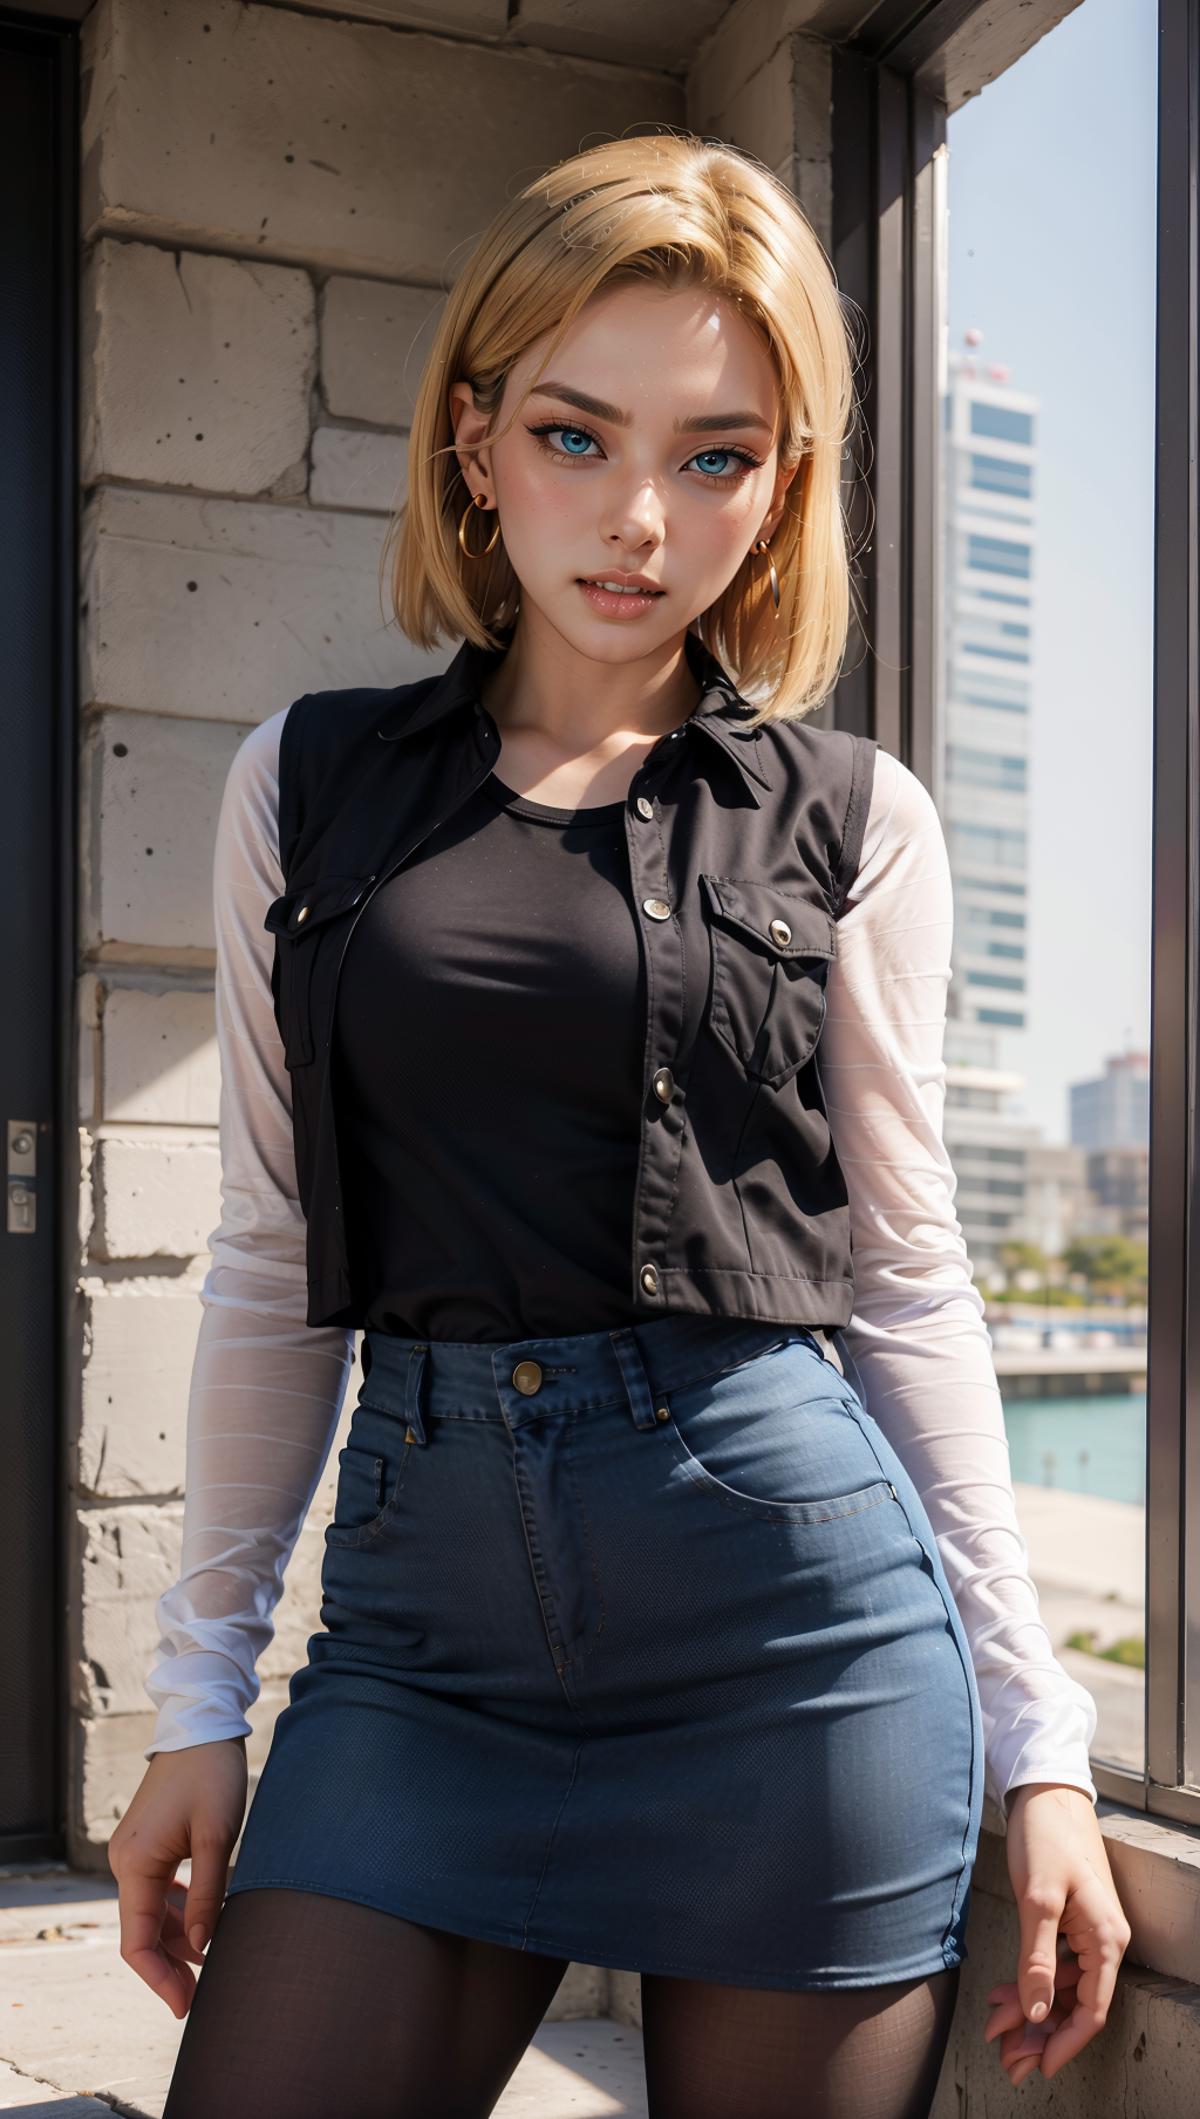 A young woman in a black shirt and blue jeans posing for a picture.